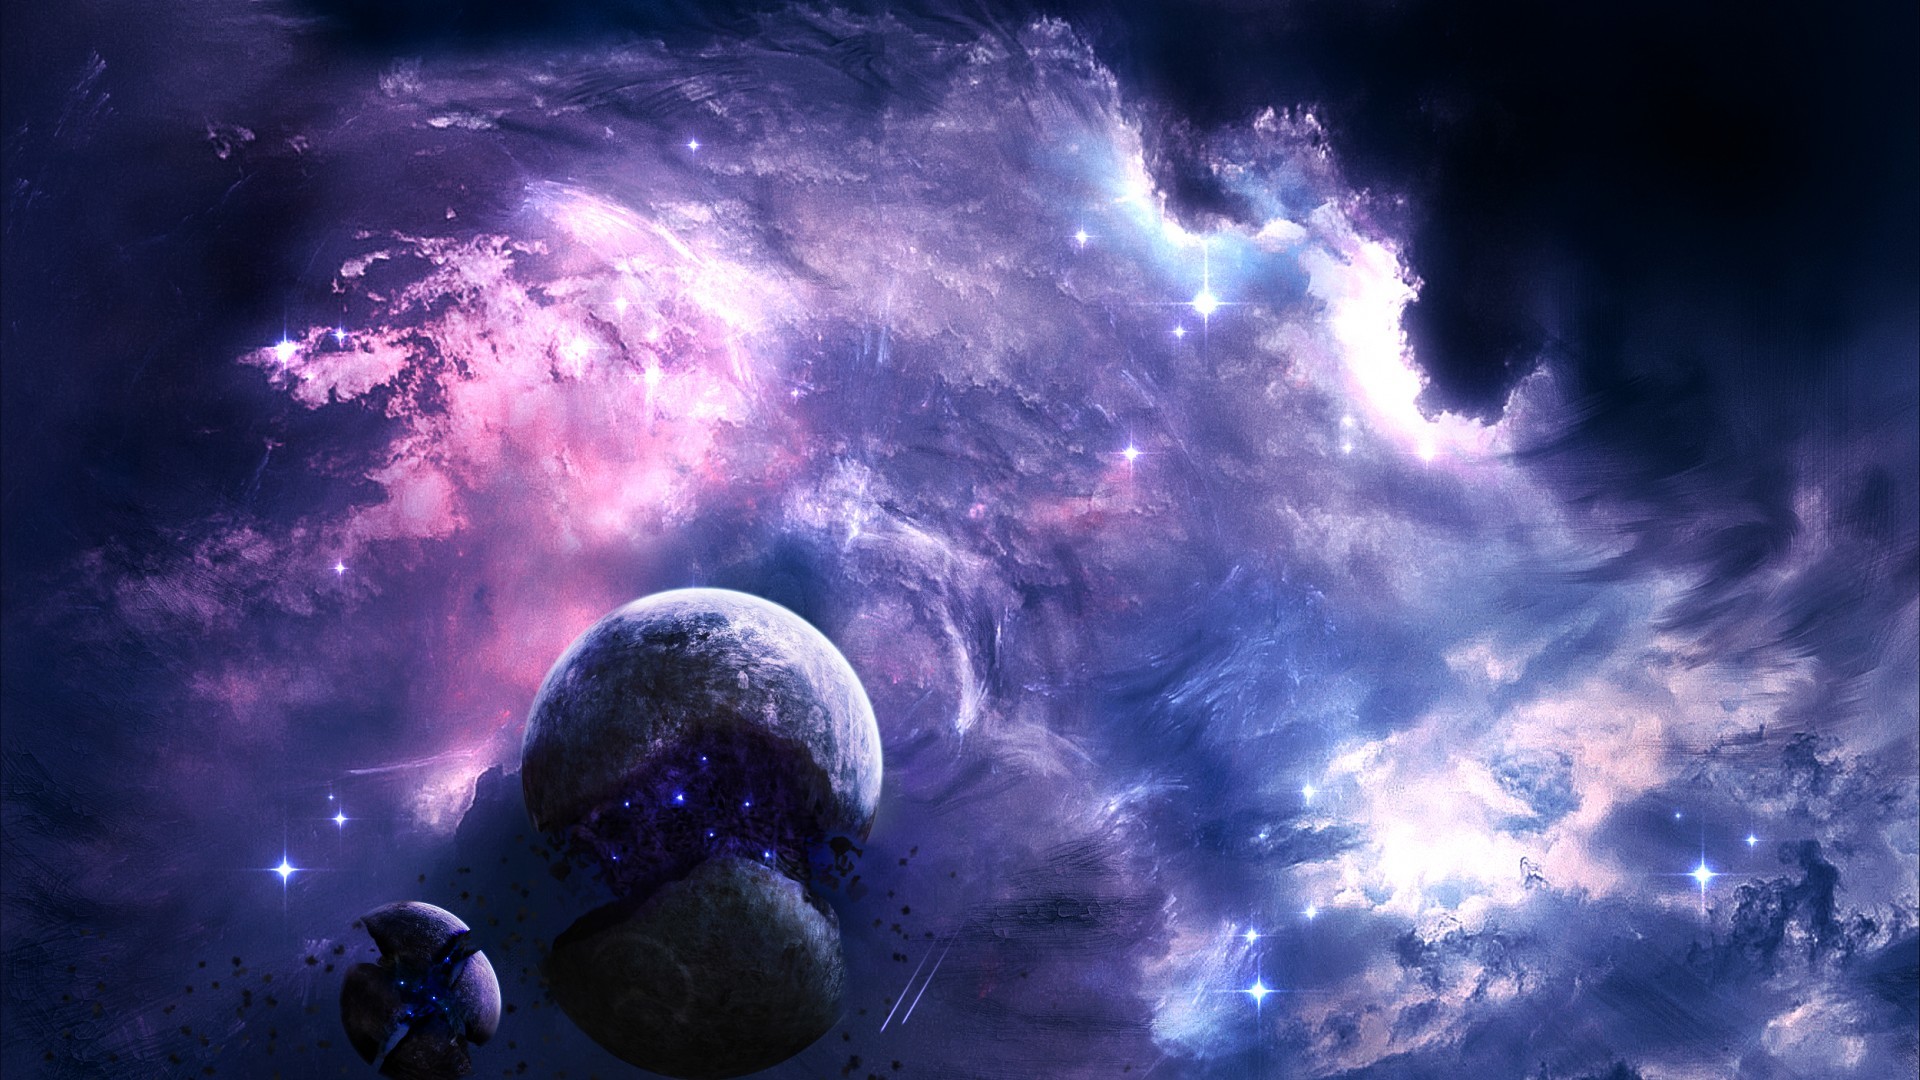 1920x1080 Collection of Hd Space Wallpaper on HDWallpapers